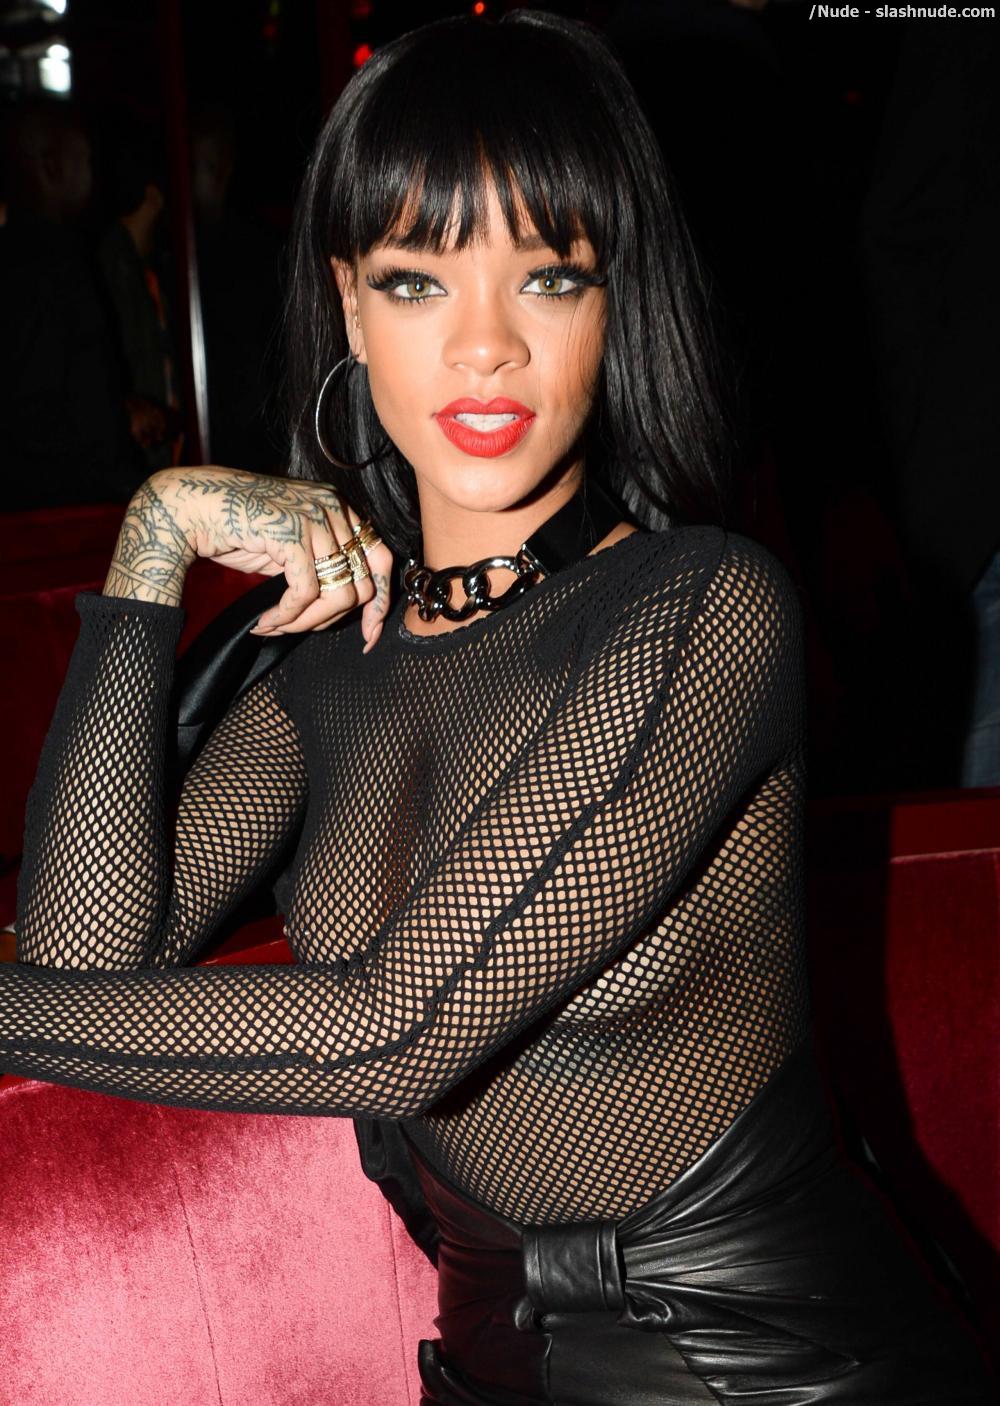 Rihanna Breasts In Totally See Through Mesh Top At Paris Party 4